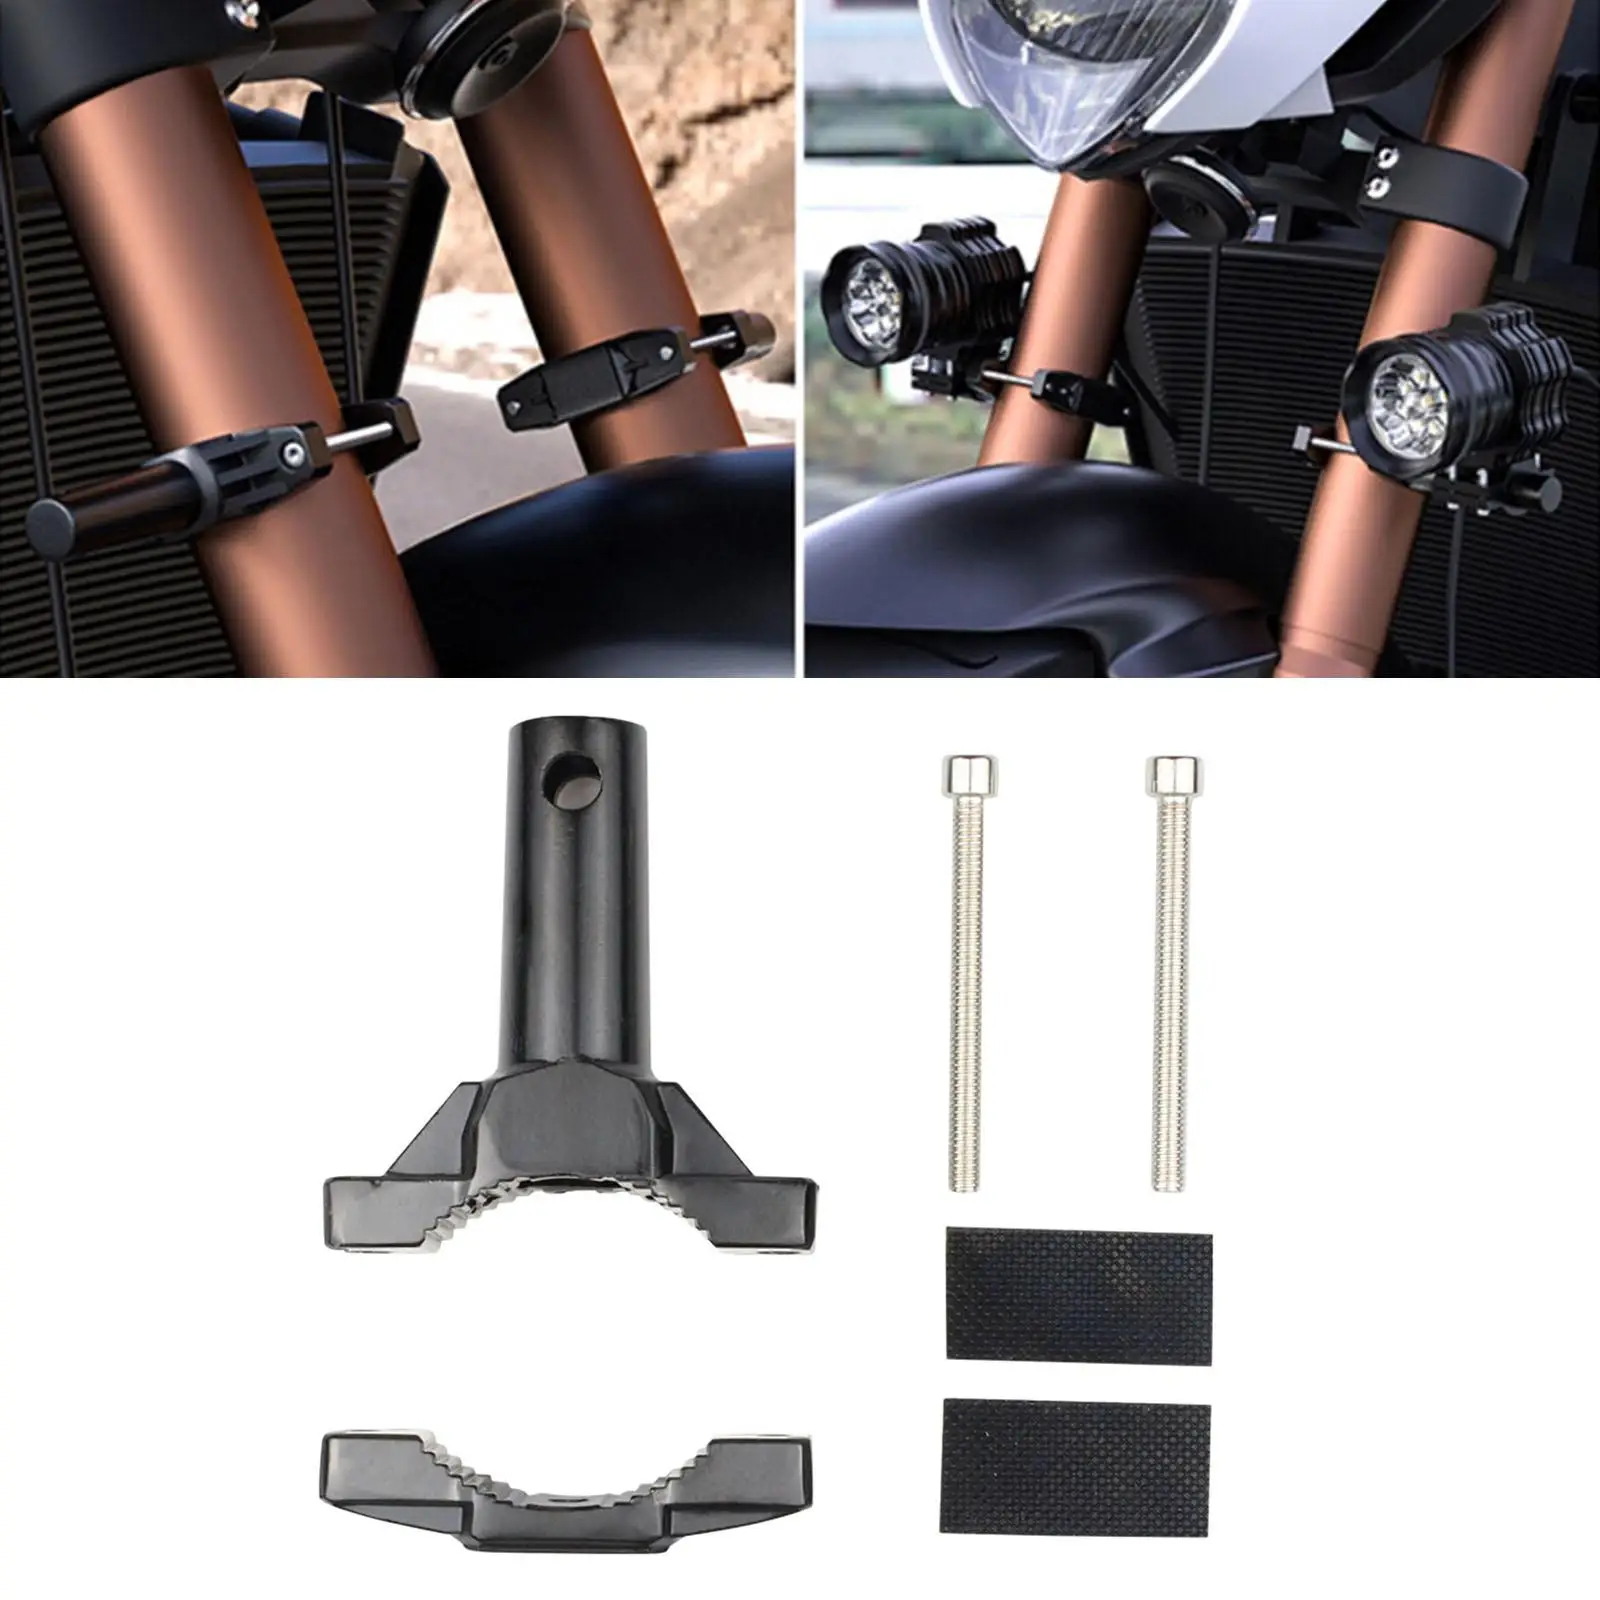 Mount Bracket Modified  Support Mounting Brackets for Motorcycle Bumper